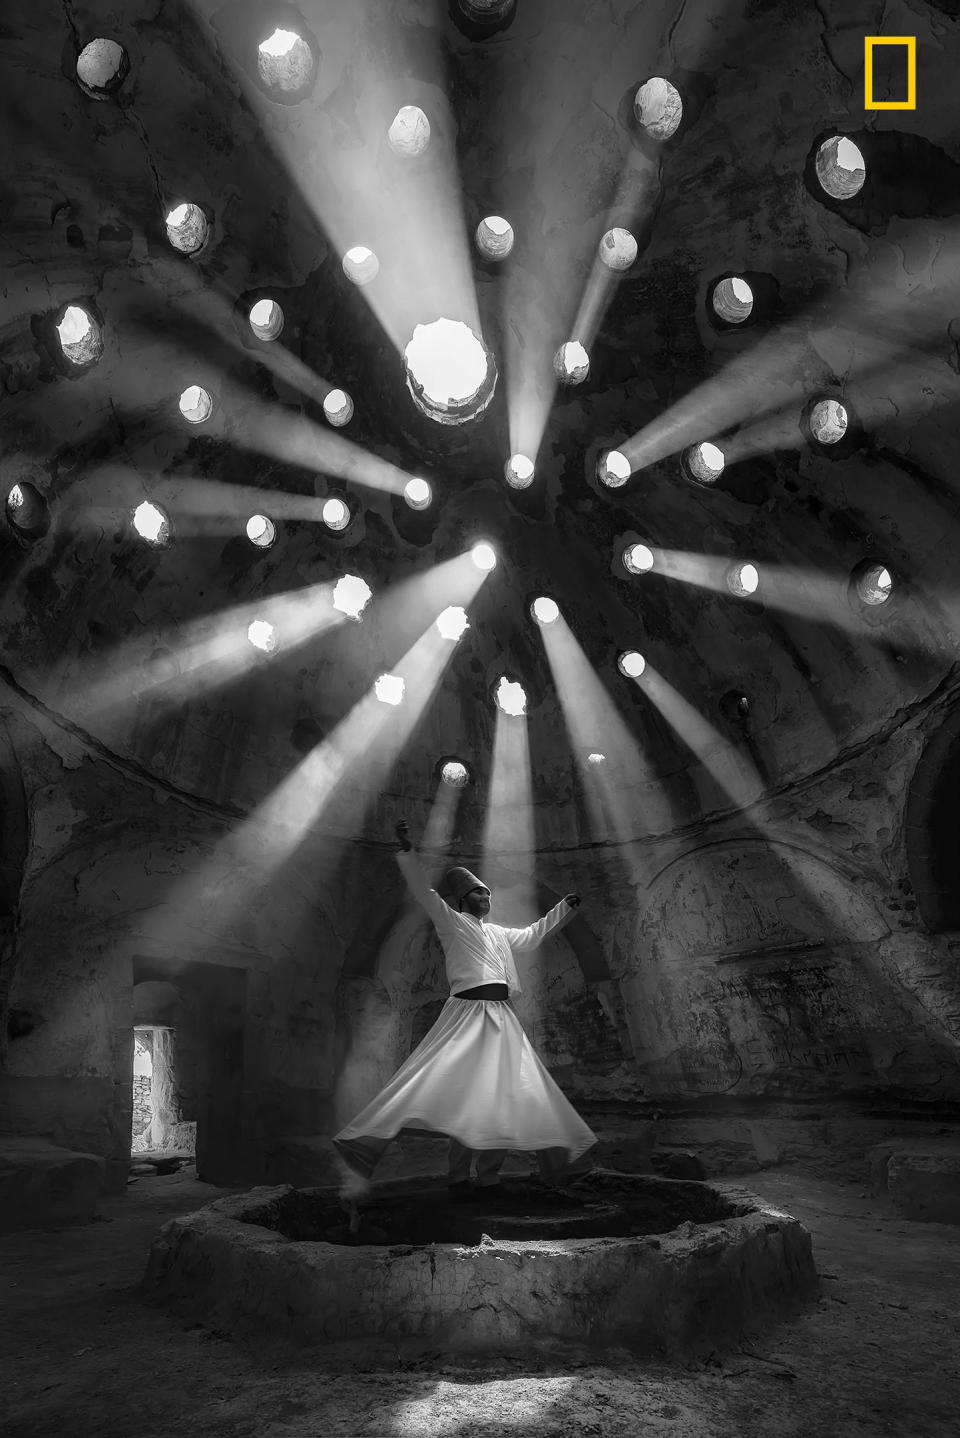 "Willing Dervish in an historical place of Sille Konya, Turkey.&nbsp;The 'dance' of the whirling dervishes is called sema and is a symbol of&nbsp;the Mevlevi culture. According to Mevlana's teachings, human beings are born twice: once of their mothers and the second time of their own bodies."&nbsp;―&nbsp;<a href="http://yourshot.nationalgeographic.com/profile/1460988/" target="_blank">F. Dilek Uyar</a>&nbsp;(<a href="http://travel.nationalgeographic.com/photographer-of-the-year-2017/gallery/winners-all/9" target="_blank">First place winner, People</a>)